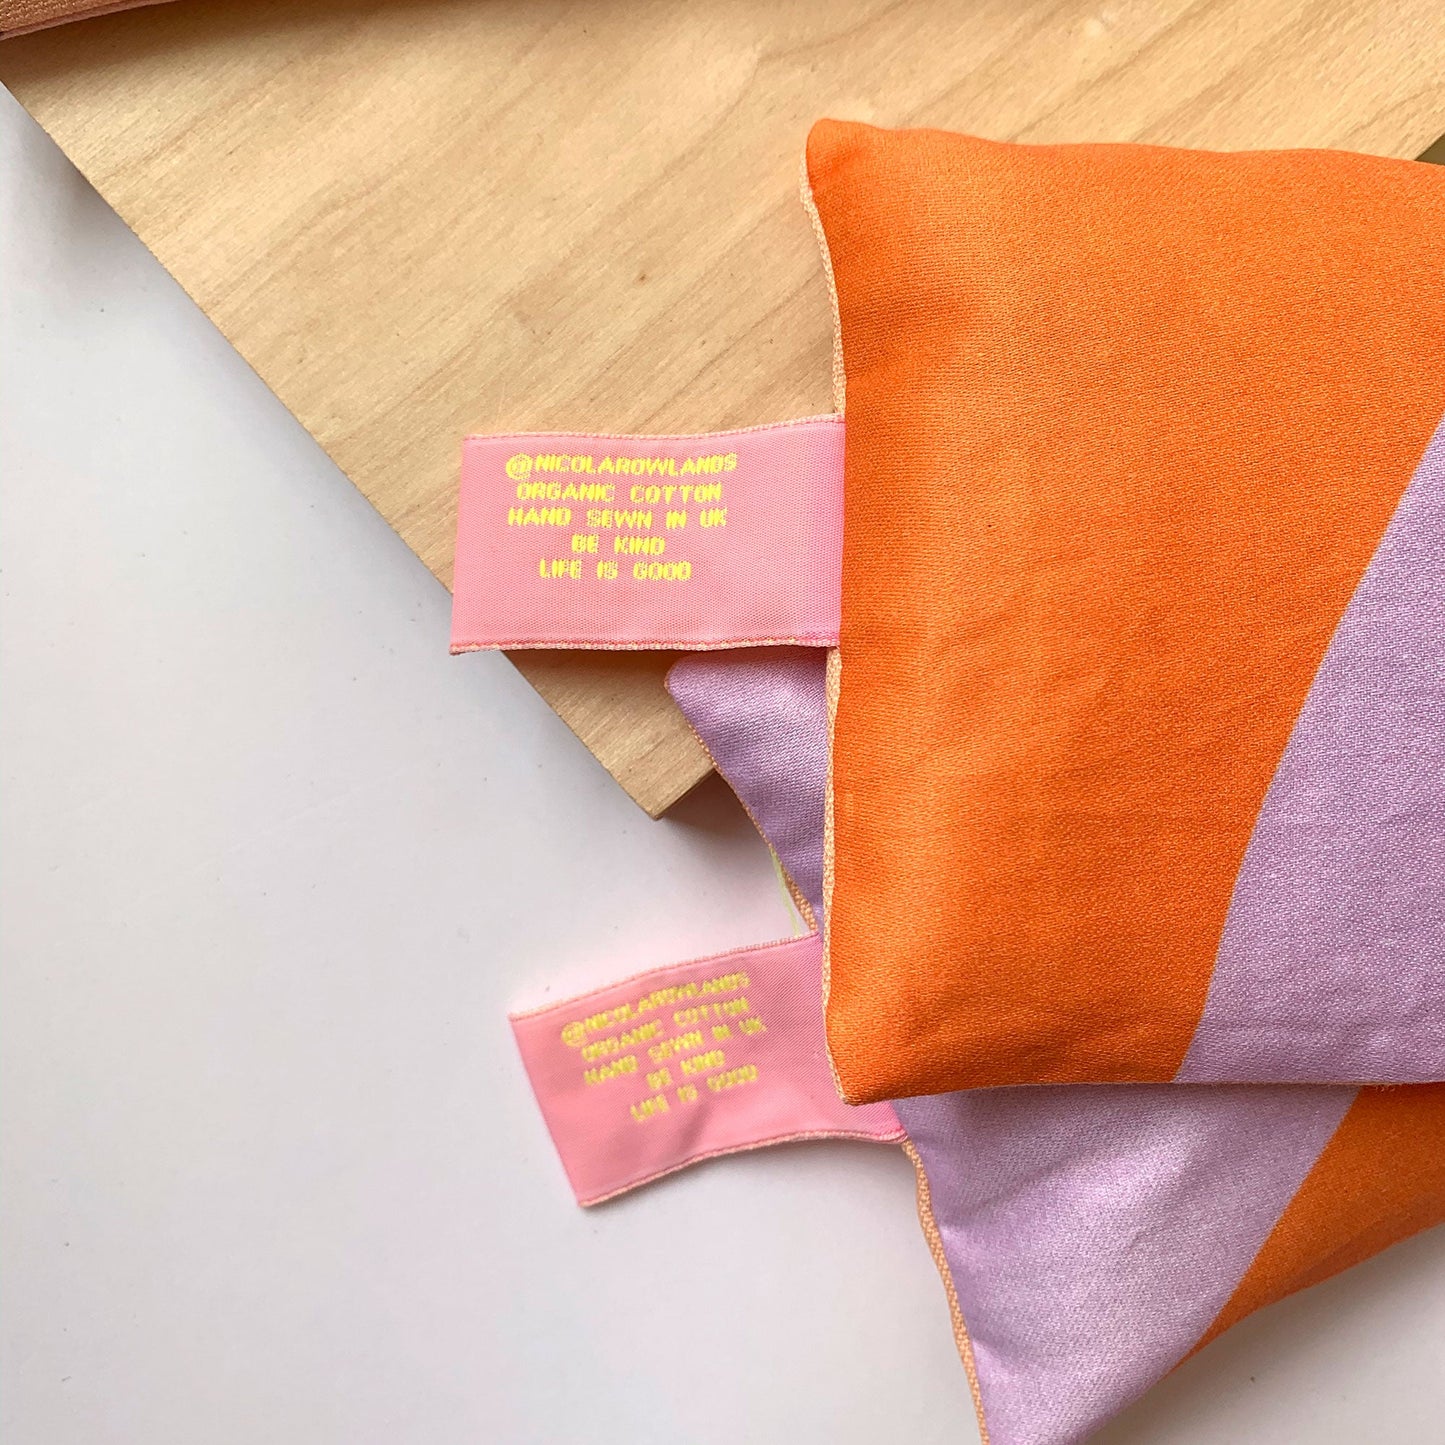 Handmade Lavender Bag: BUSY RELAXING and overthinking